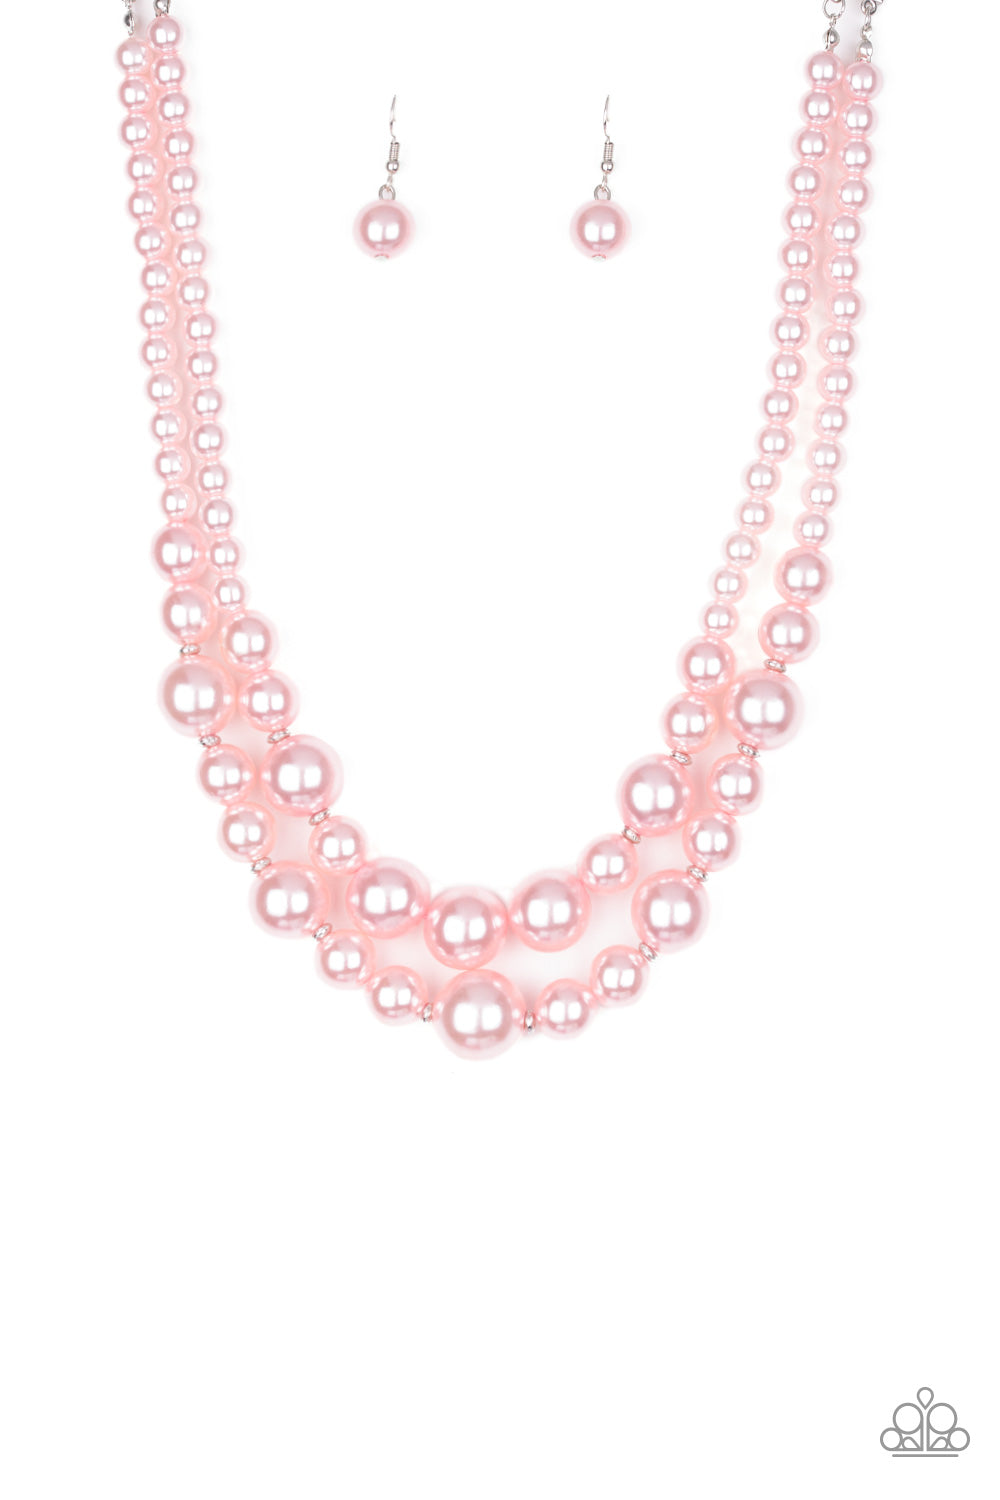 Infused with dainty silver accents, classic pink pearls layer below the collar in a timeless fashion. Features an adjustable clasp closure.